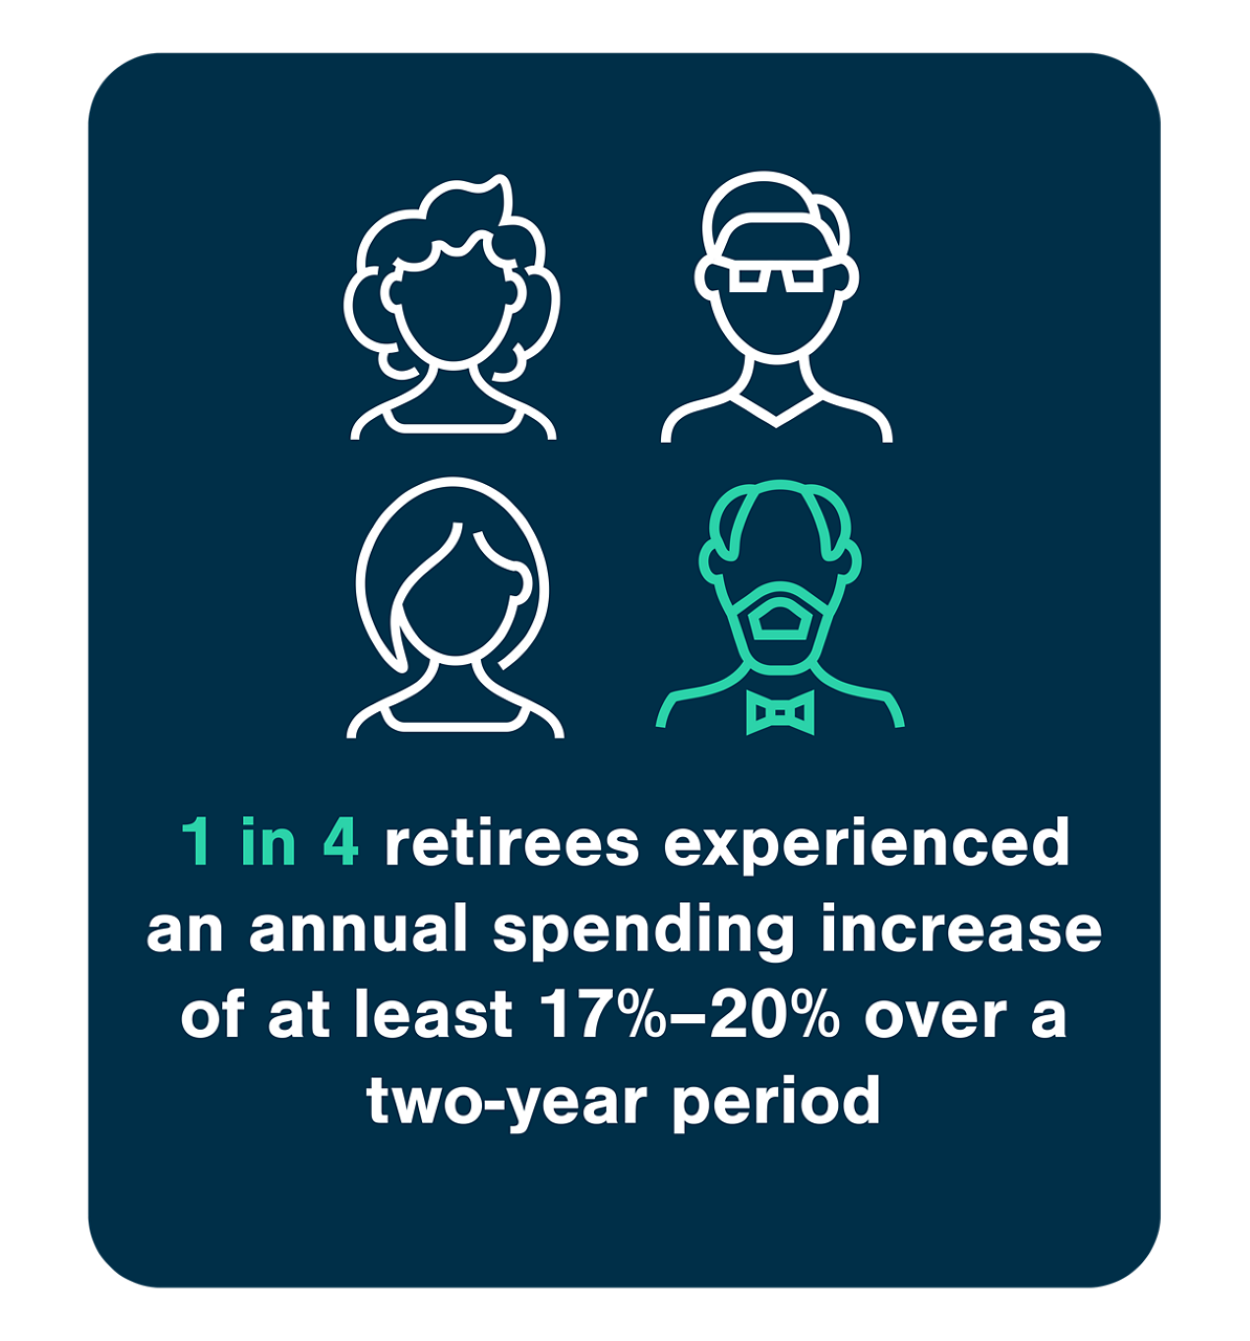 1 in 4 retirees experienced an annual spending increase of at least 17%-20% over a two year period.